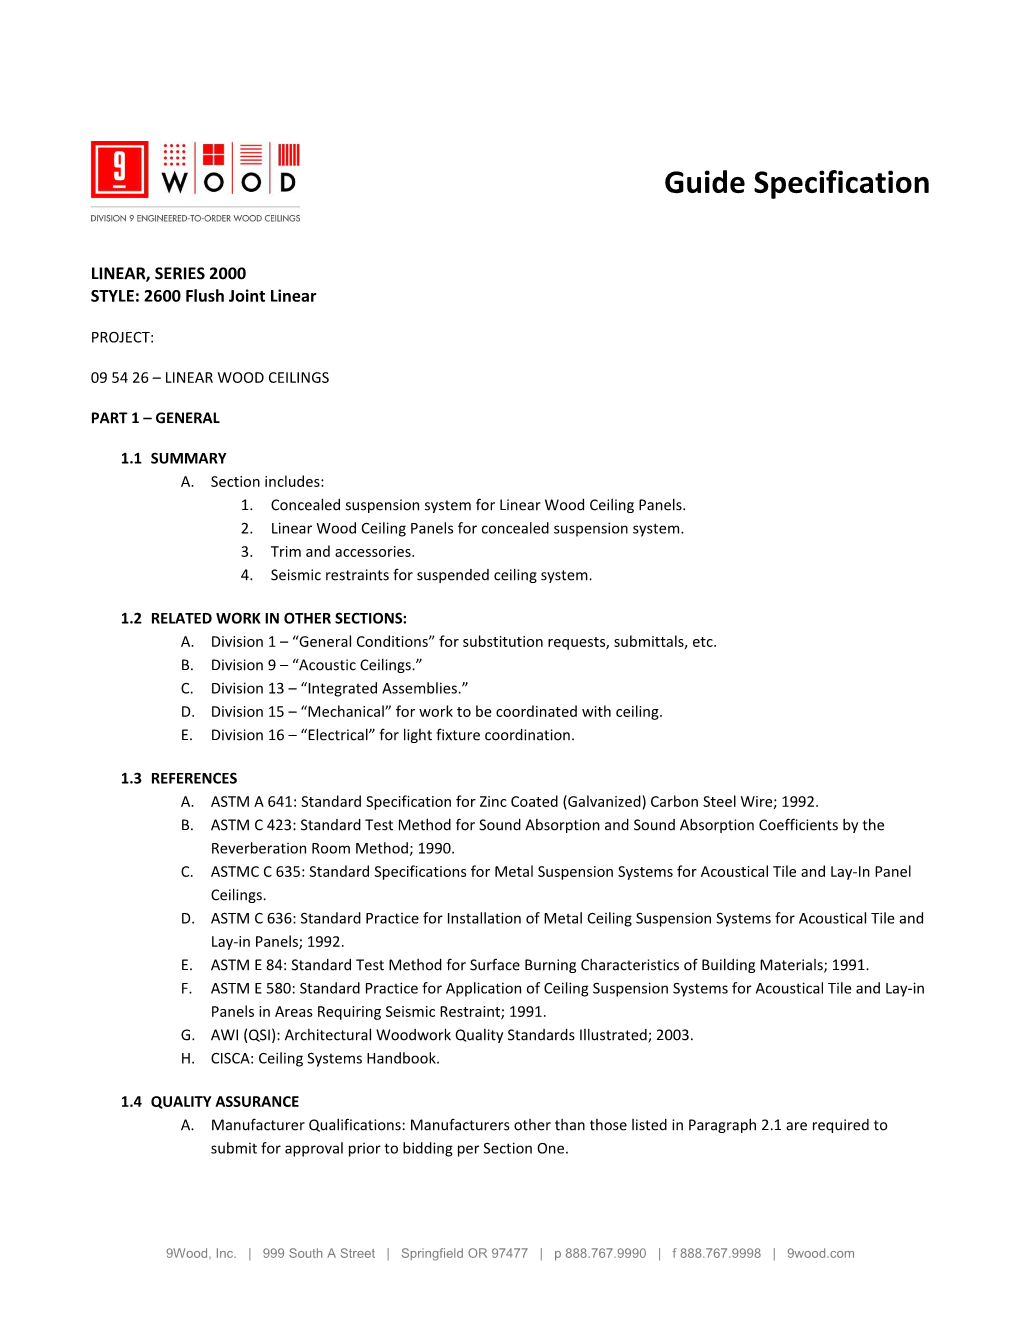 Guide Specification s1